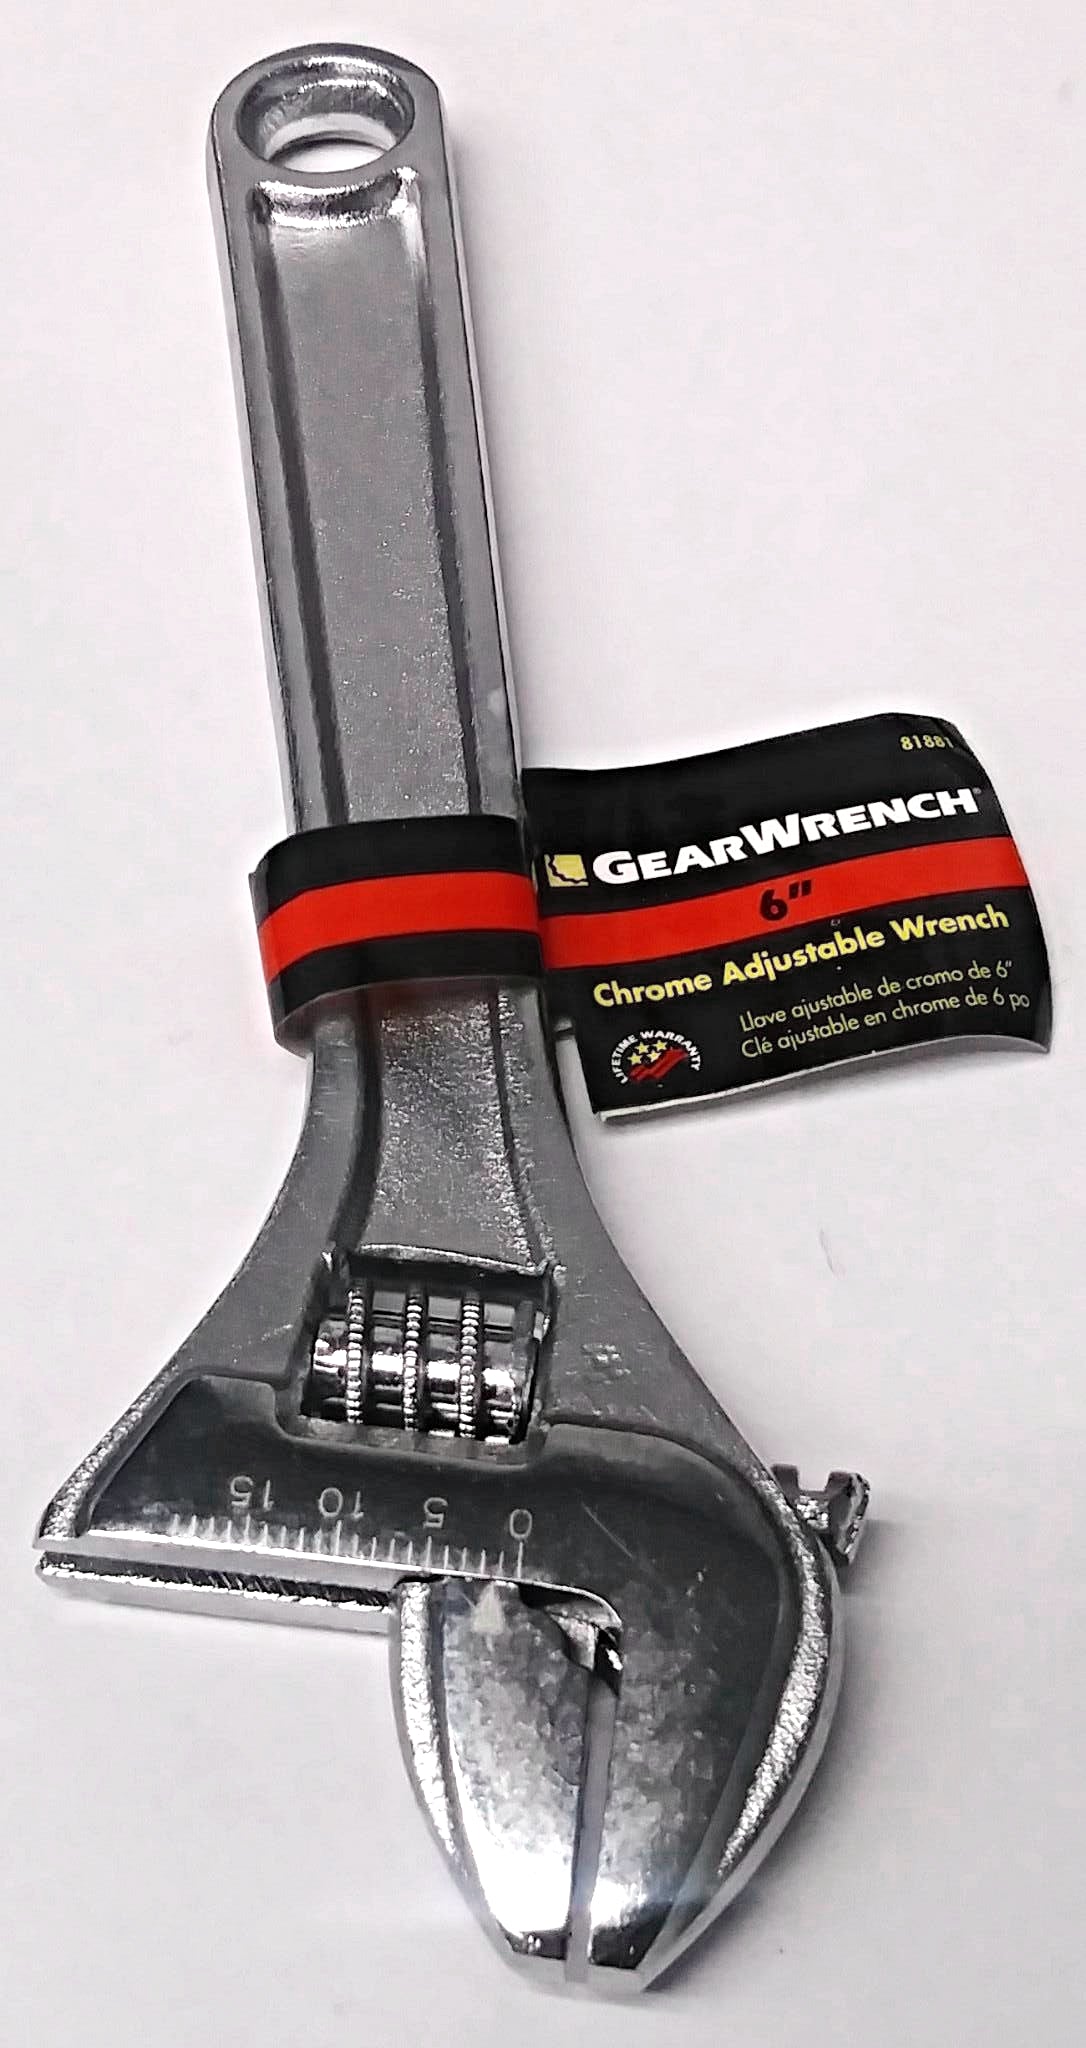 Gearwrench 81881 6" Chrome Adjustable Wrench